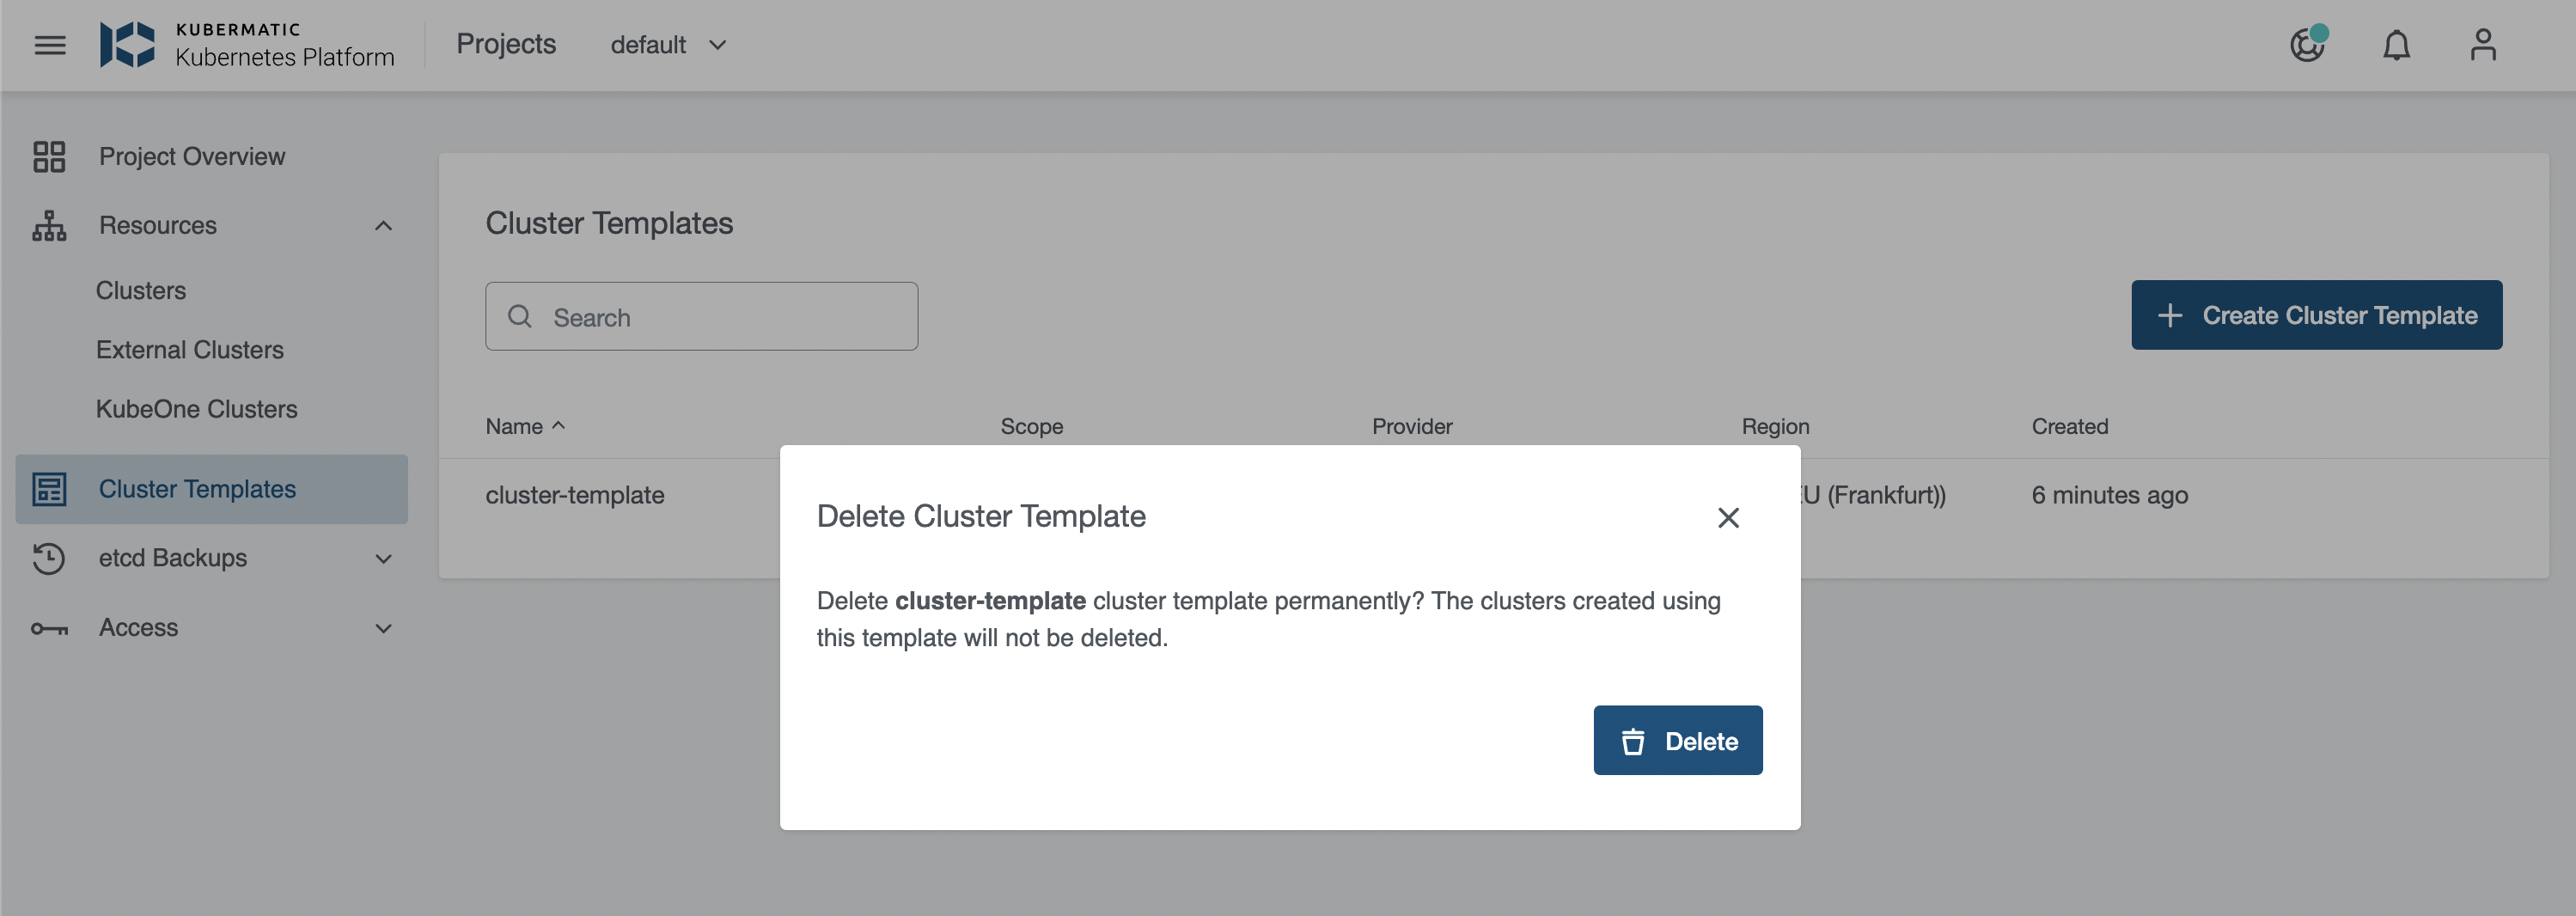 Delete from cluster template wizard